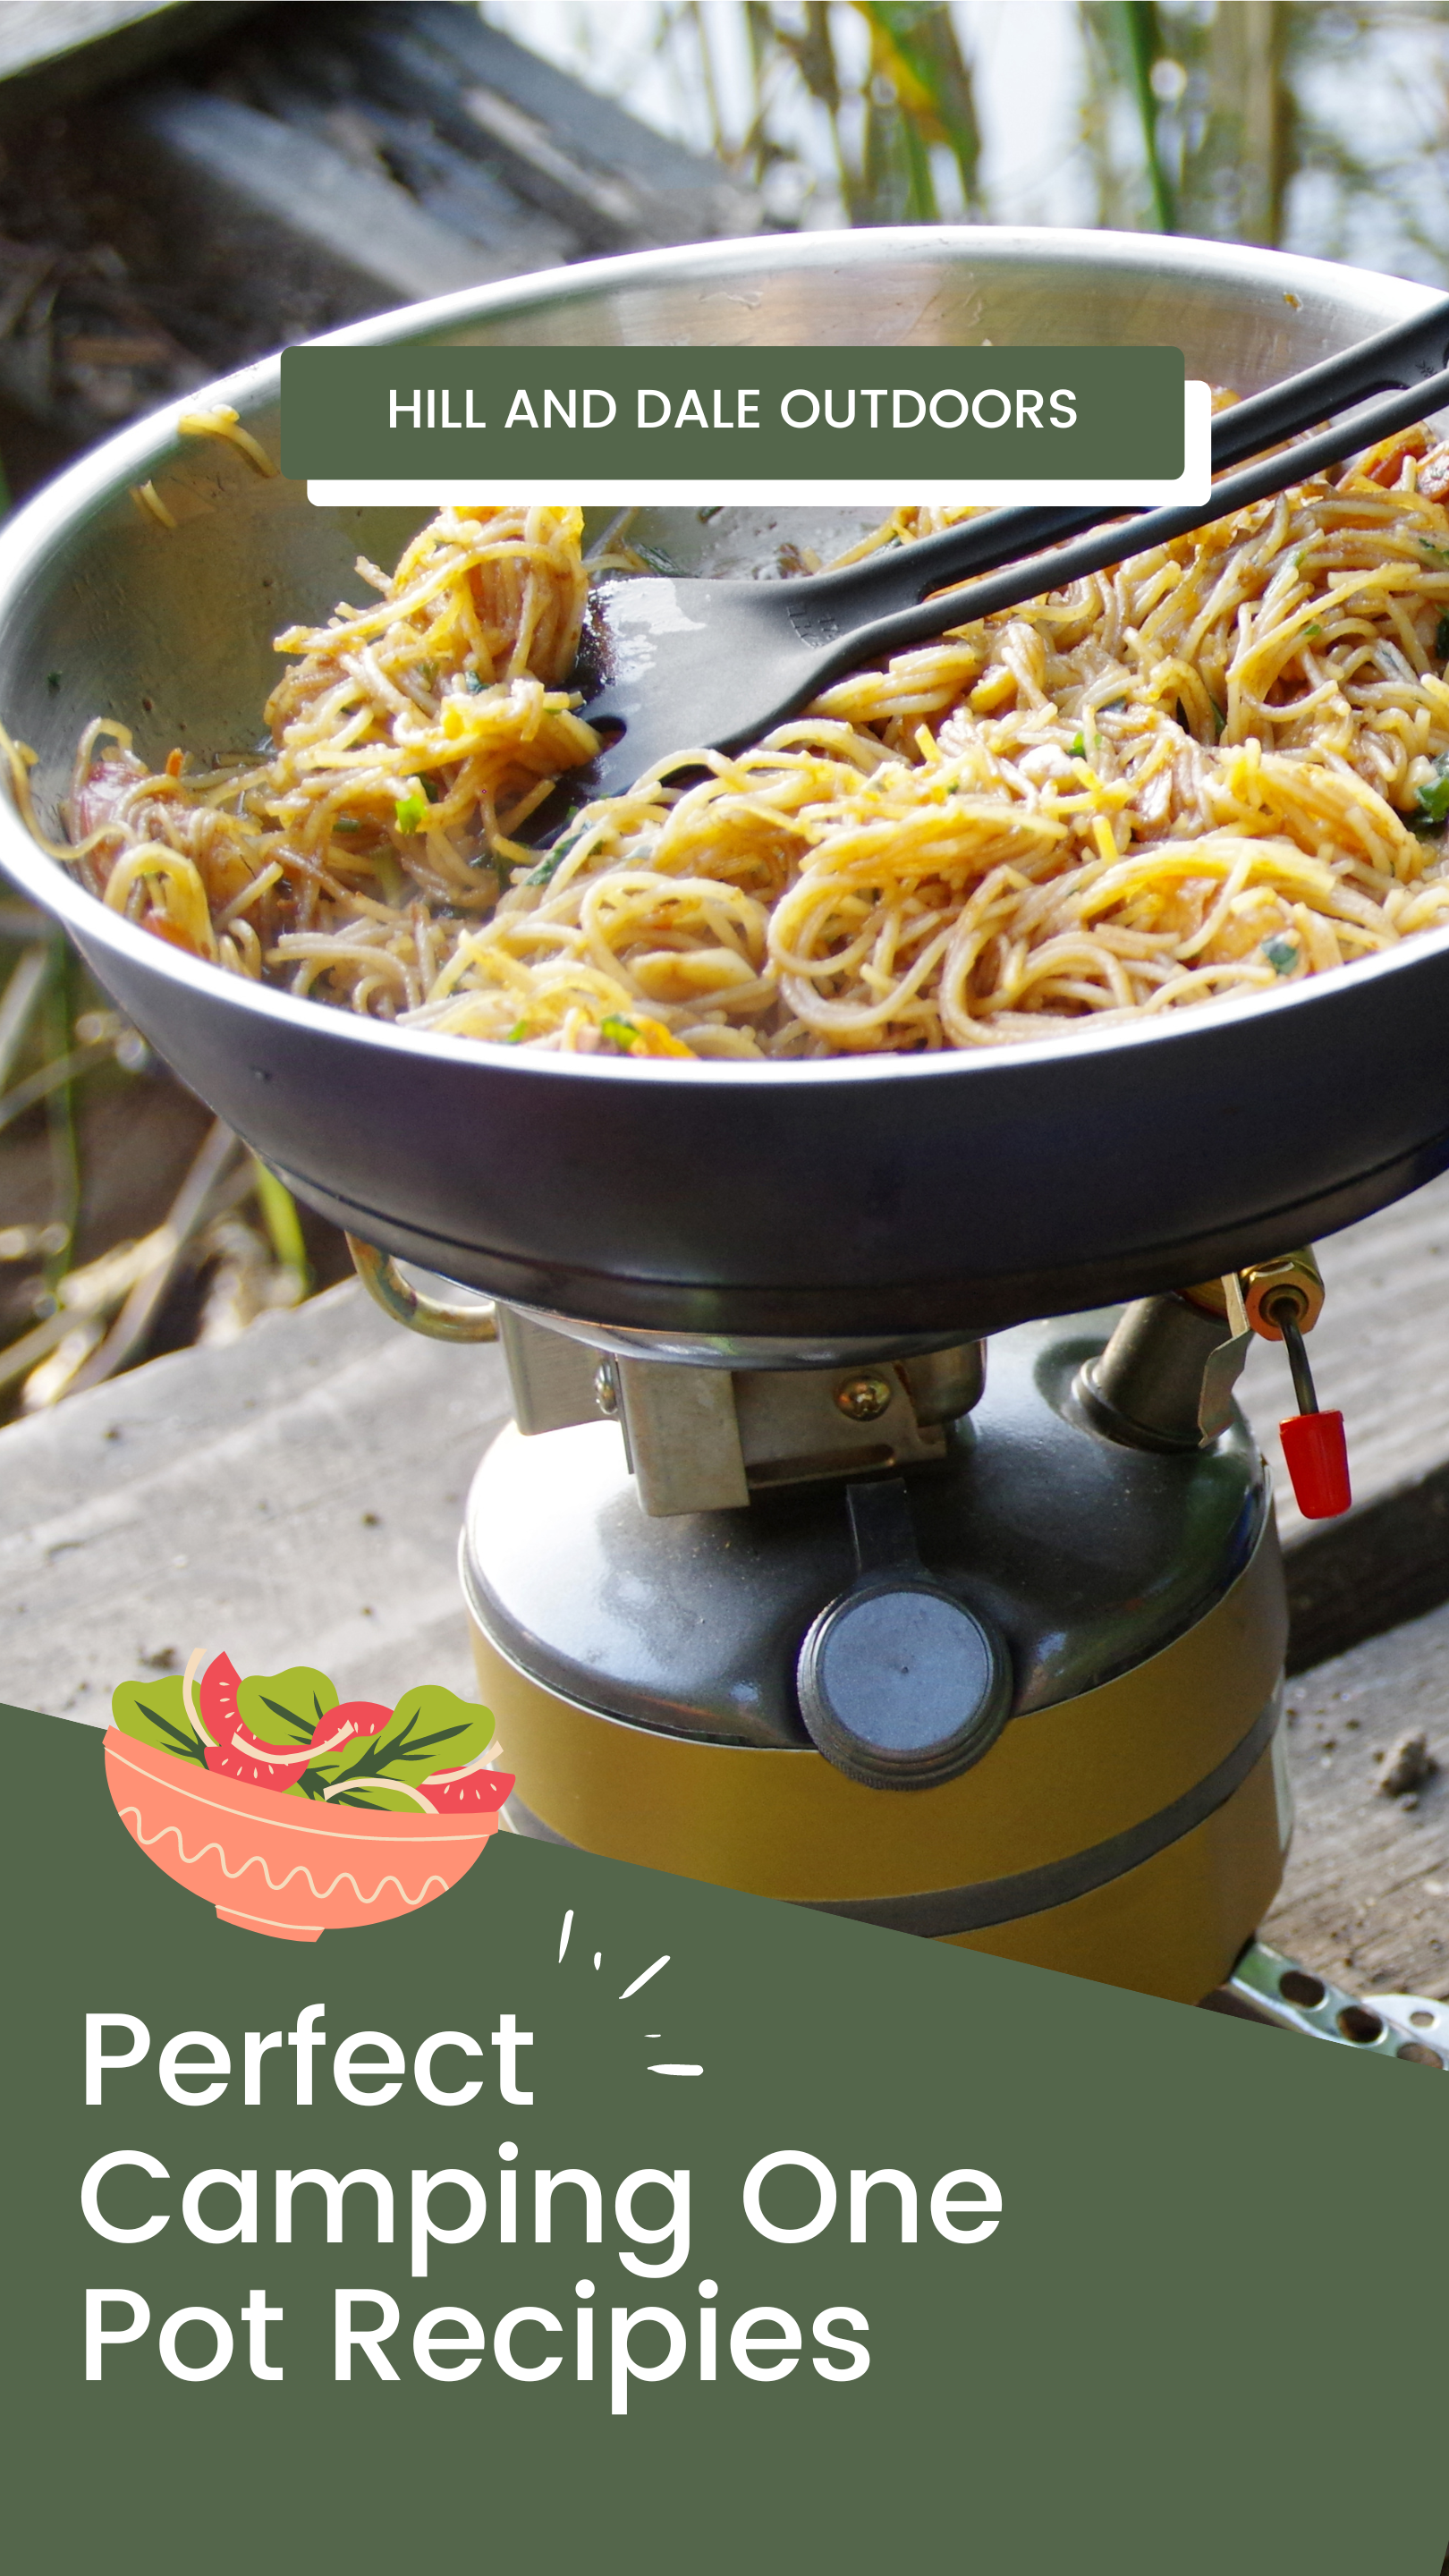 Perfect Camping One Pot Recipes (vegan options included)